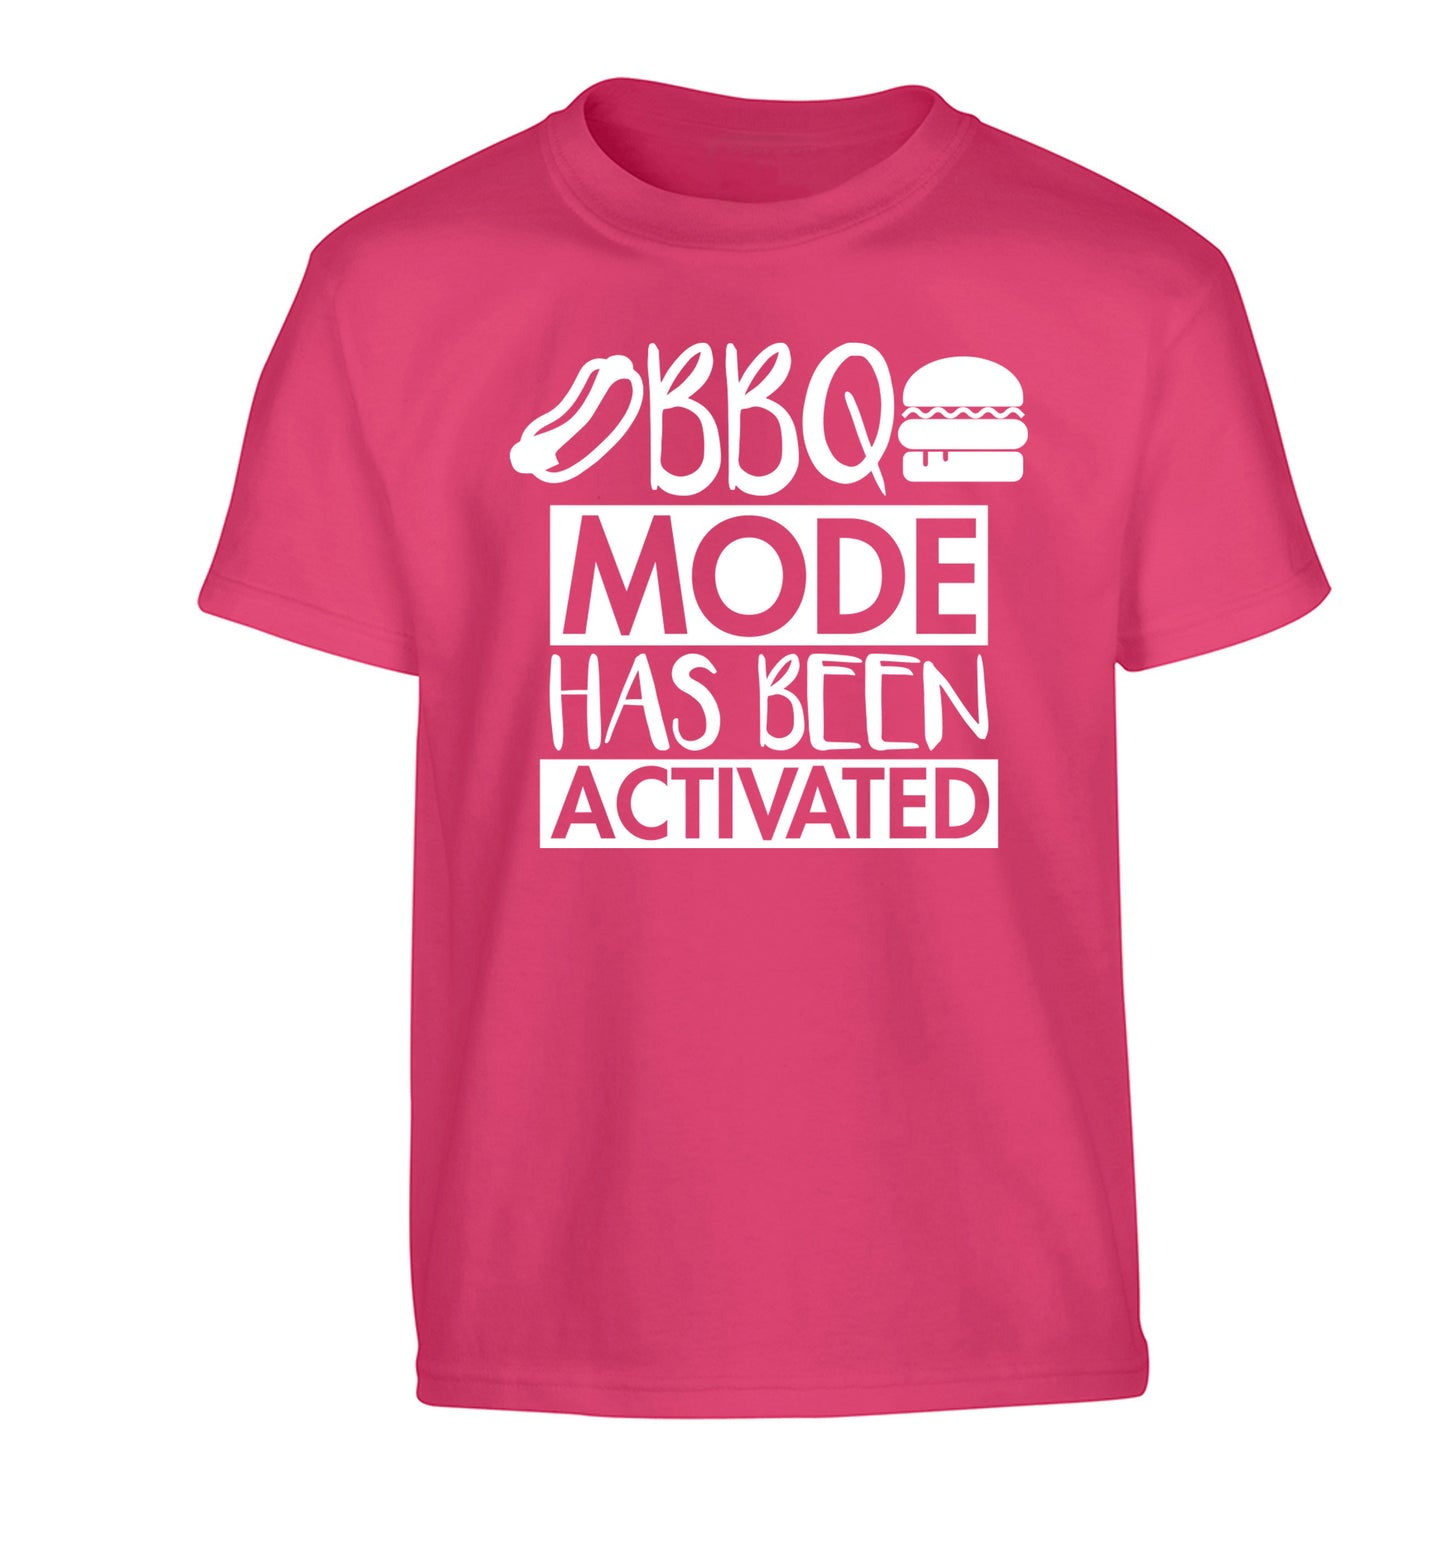 Bbq mode has been activated Children's pink Tshirt 12-14 Years